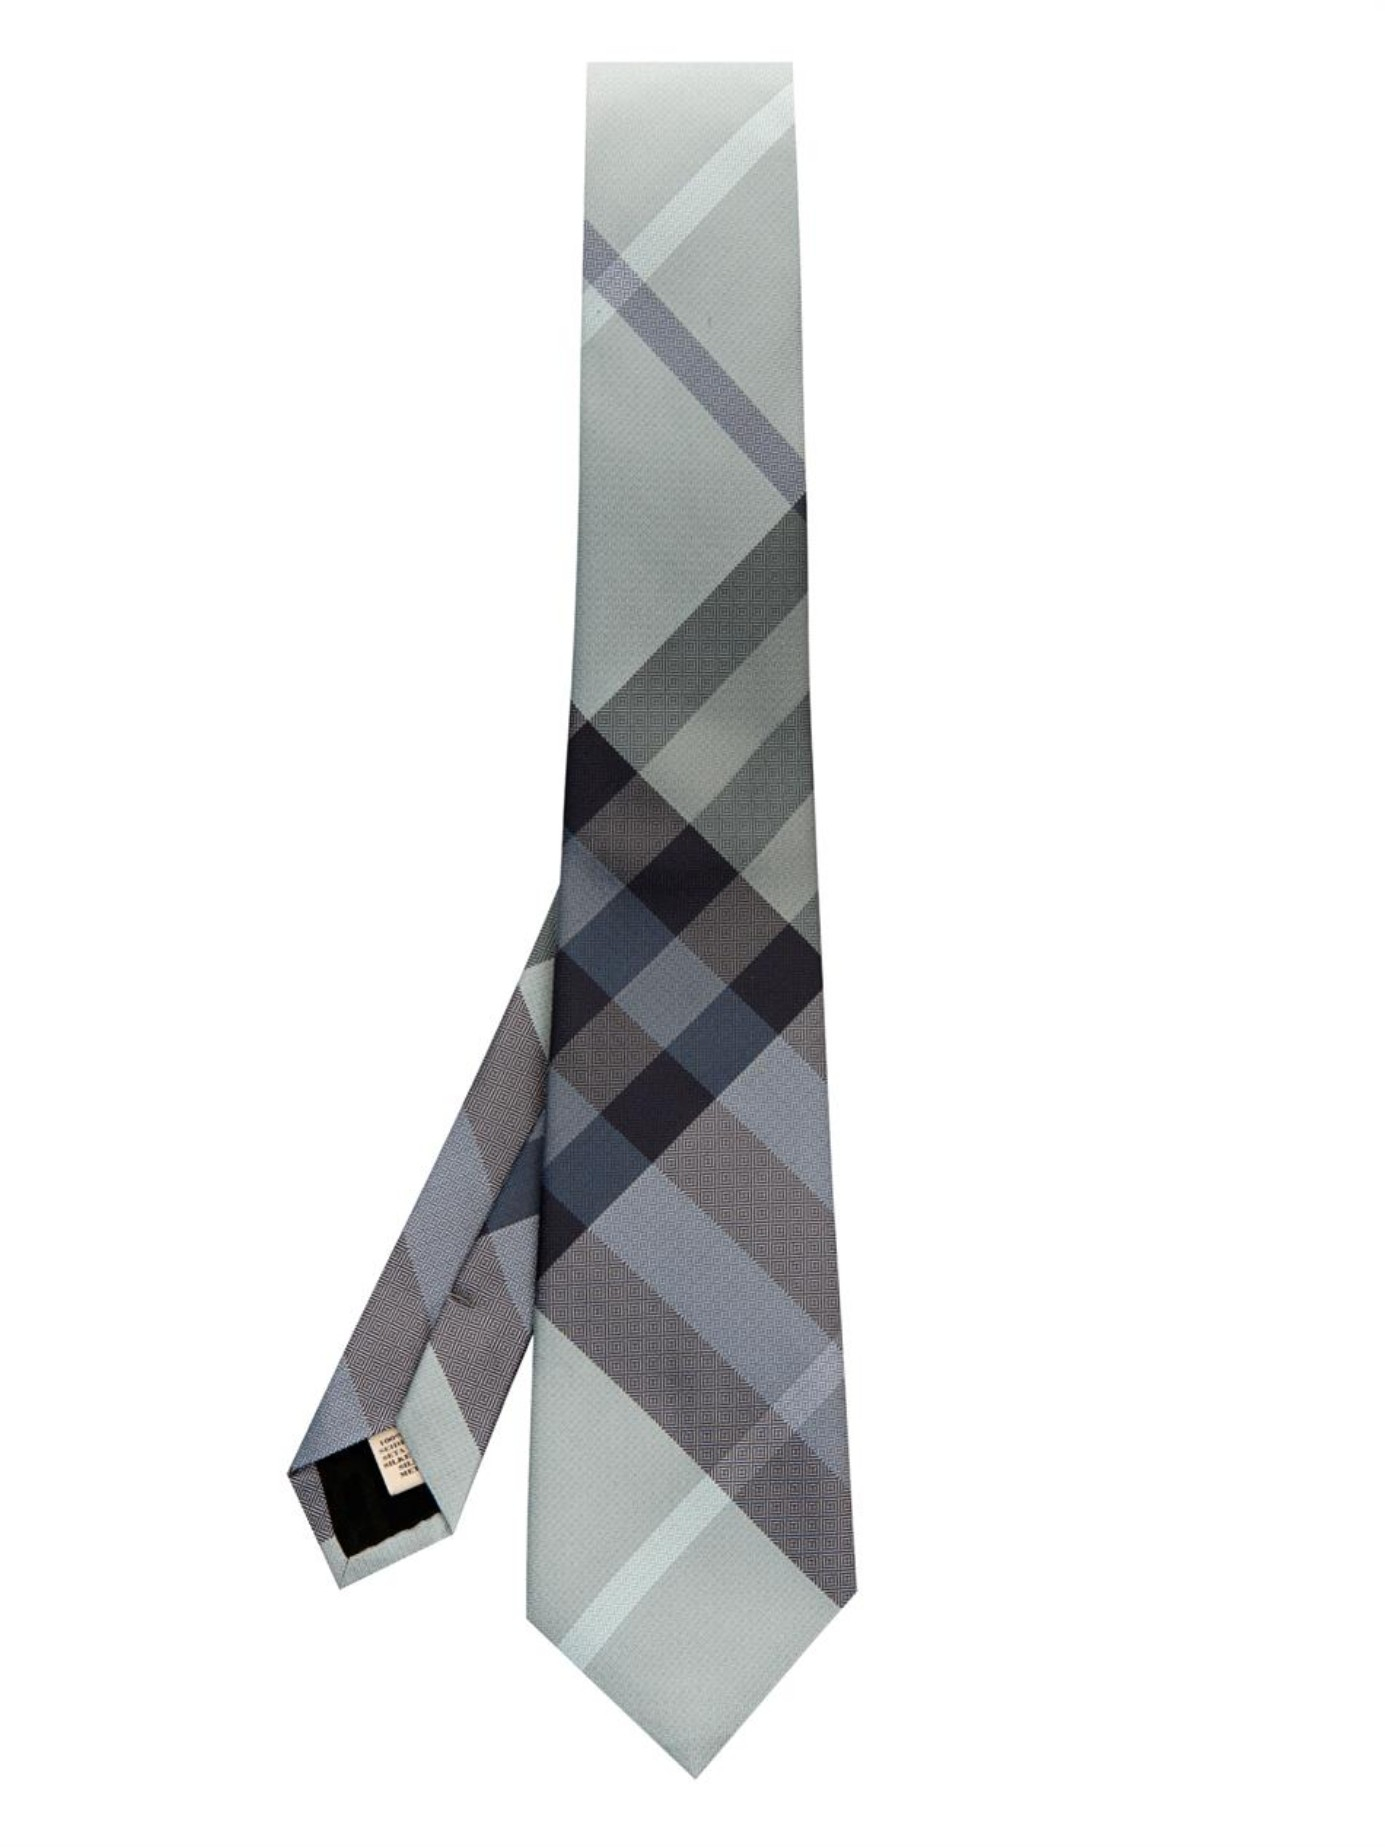 Burberry Rohan Heritage-Check Silk Tie in Light Blue (Blue) for Men - Lyst